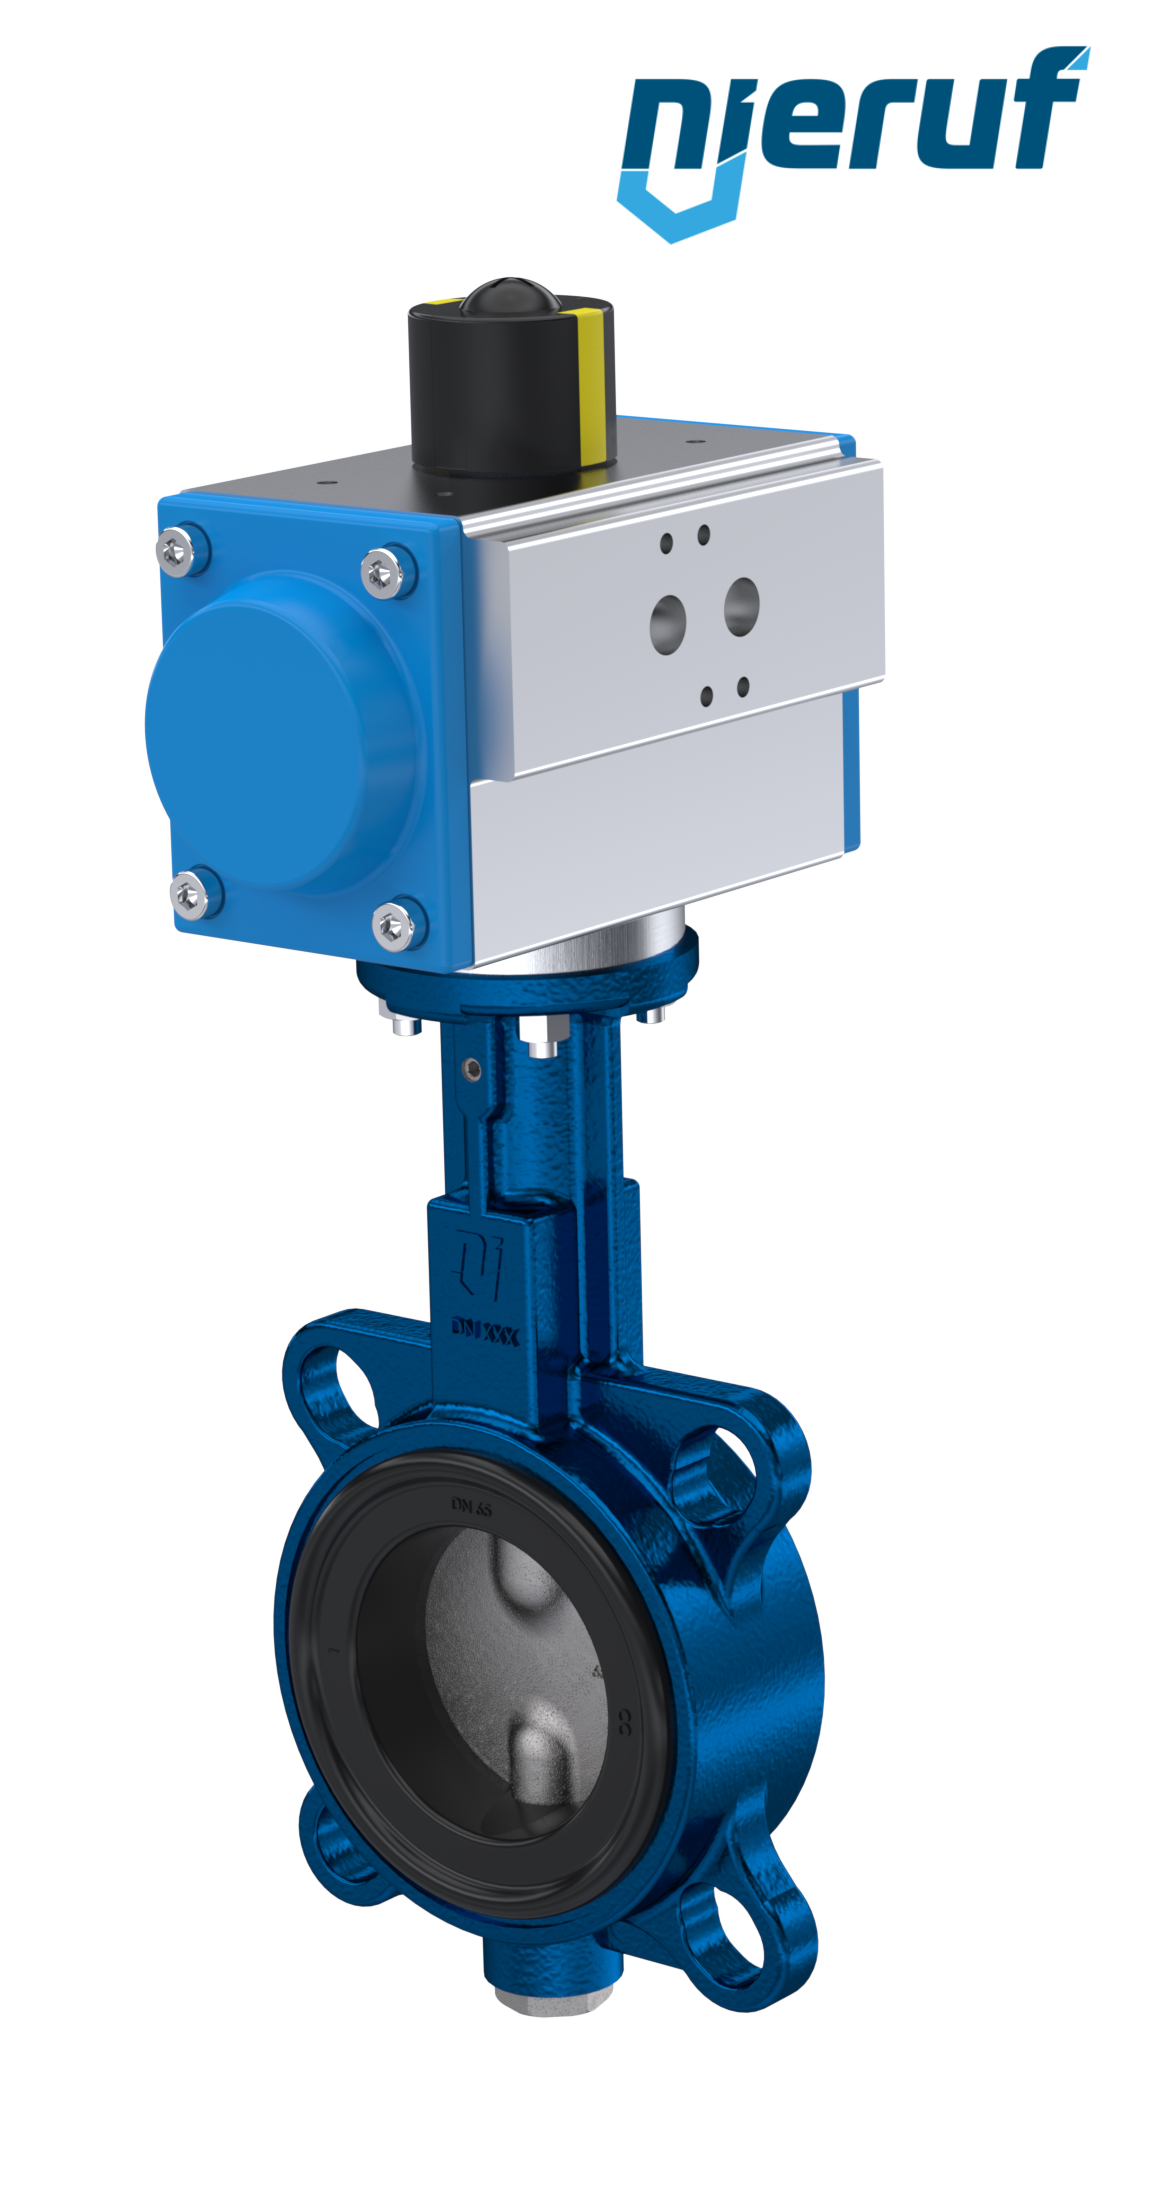 Butterfly valve DN 65 AK01 EPDM DVGW drinking water, WRAS, ACS, W270 pneumatic actuator double acting